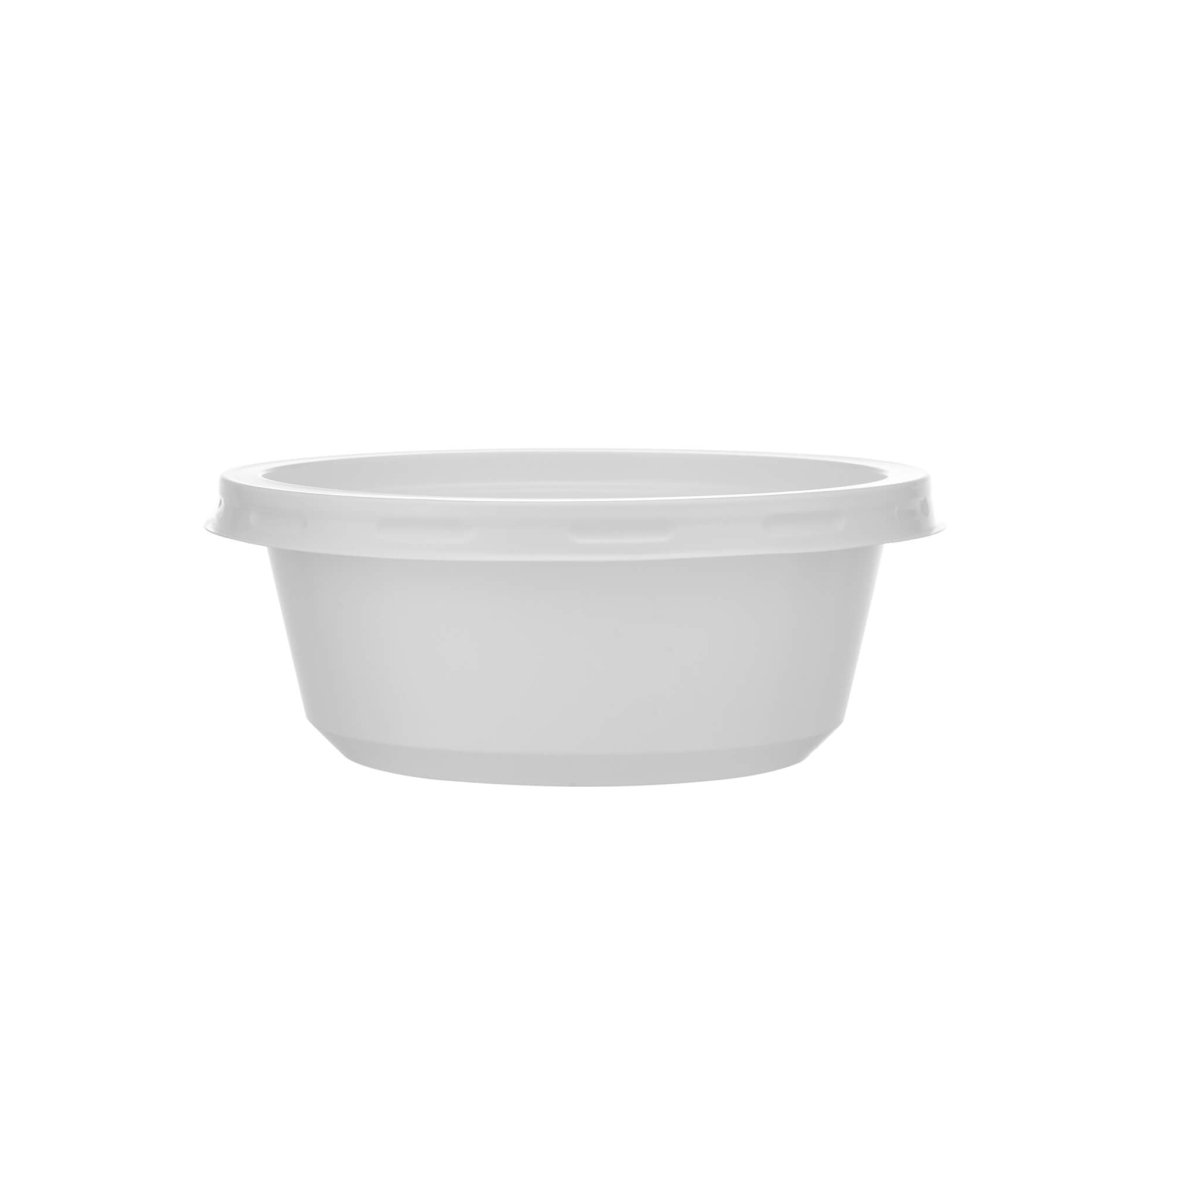 Plastic Plain White PP Bowl - hotpackwebstore.com - Microwavable Containers